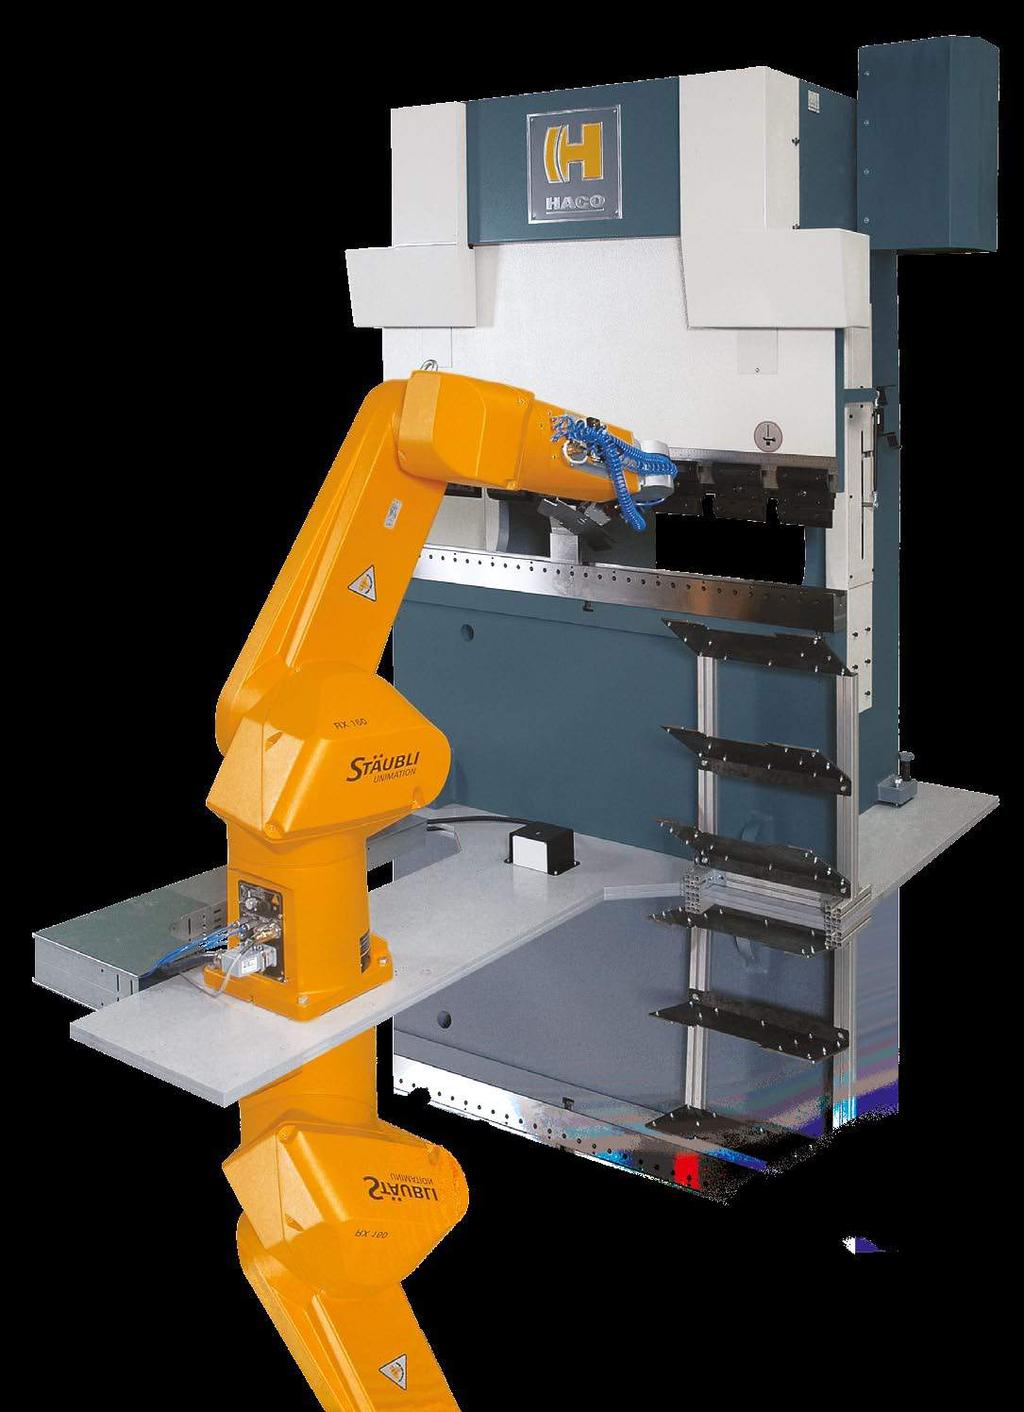 ROBOT BENDING SYSTEM THE NEXT STEP IN AUTOMATED BENDING 02 PRODUCTIVITY THROUGH TECHNOLOGY.